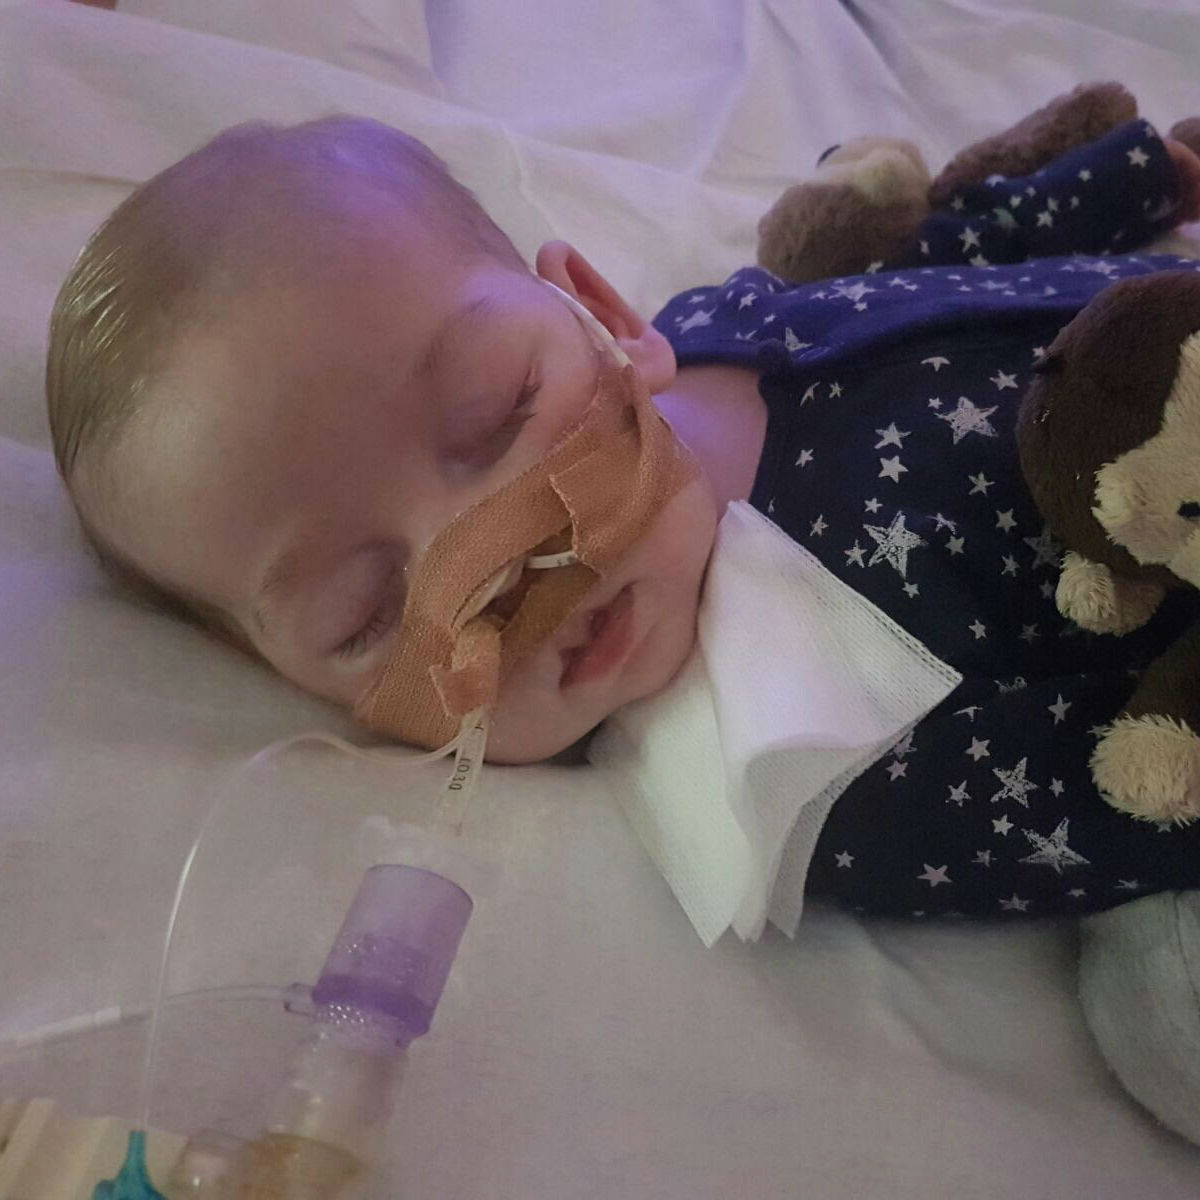 Foreign Secretary, Boris Johnson, says Charlie Gard cannot be moved to Vatican